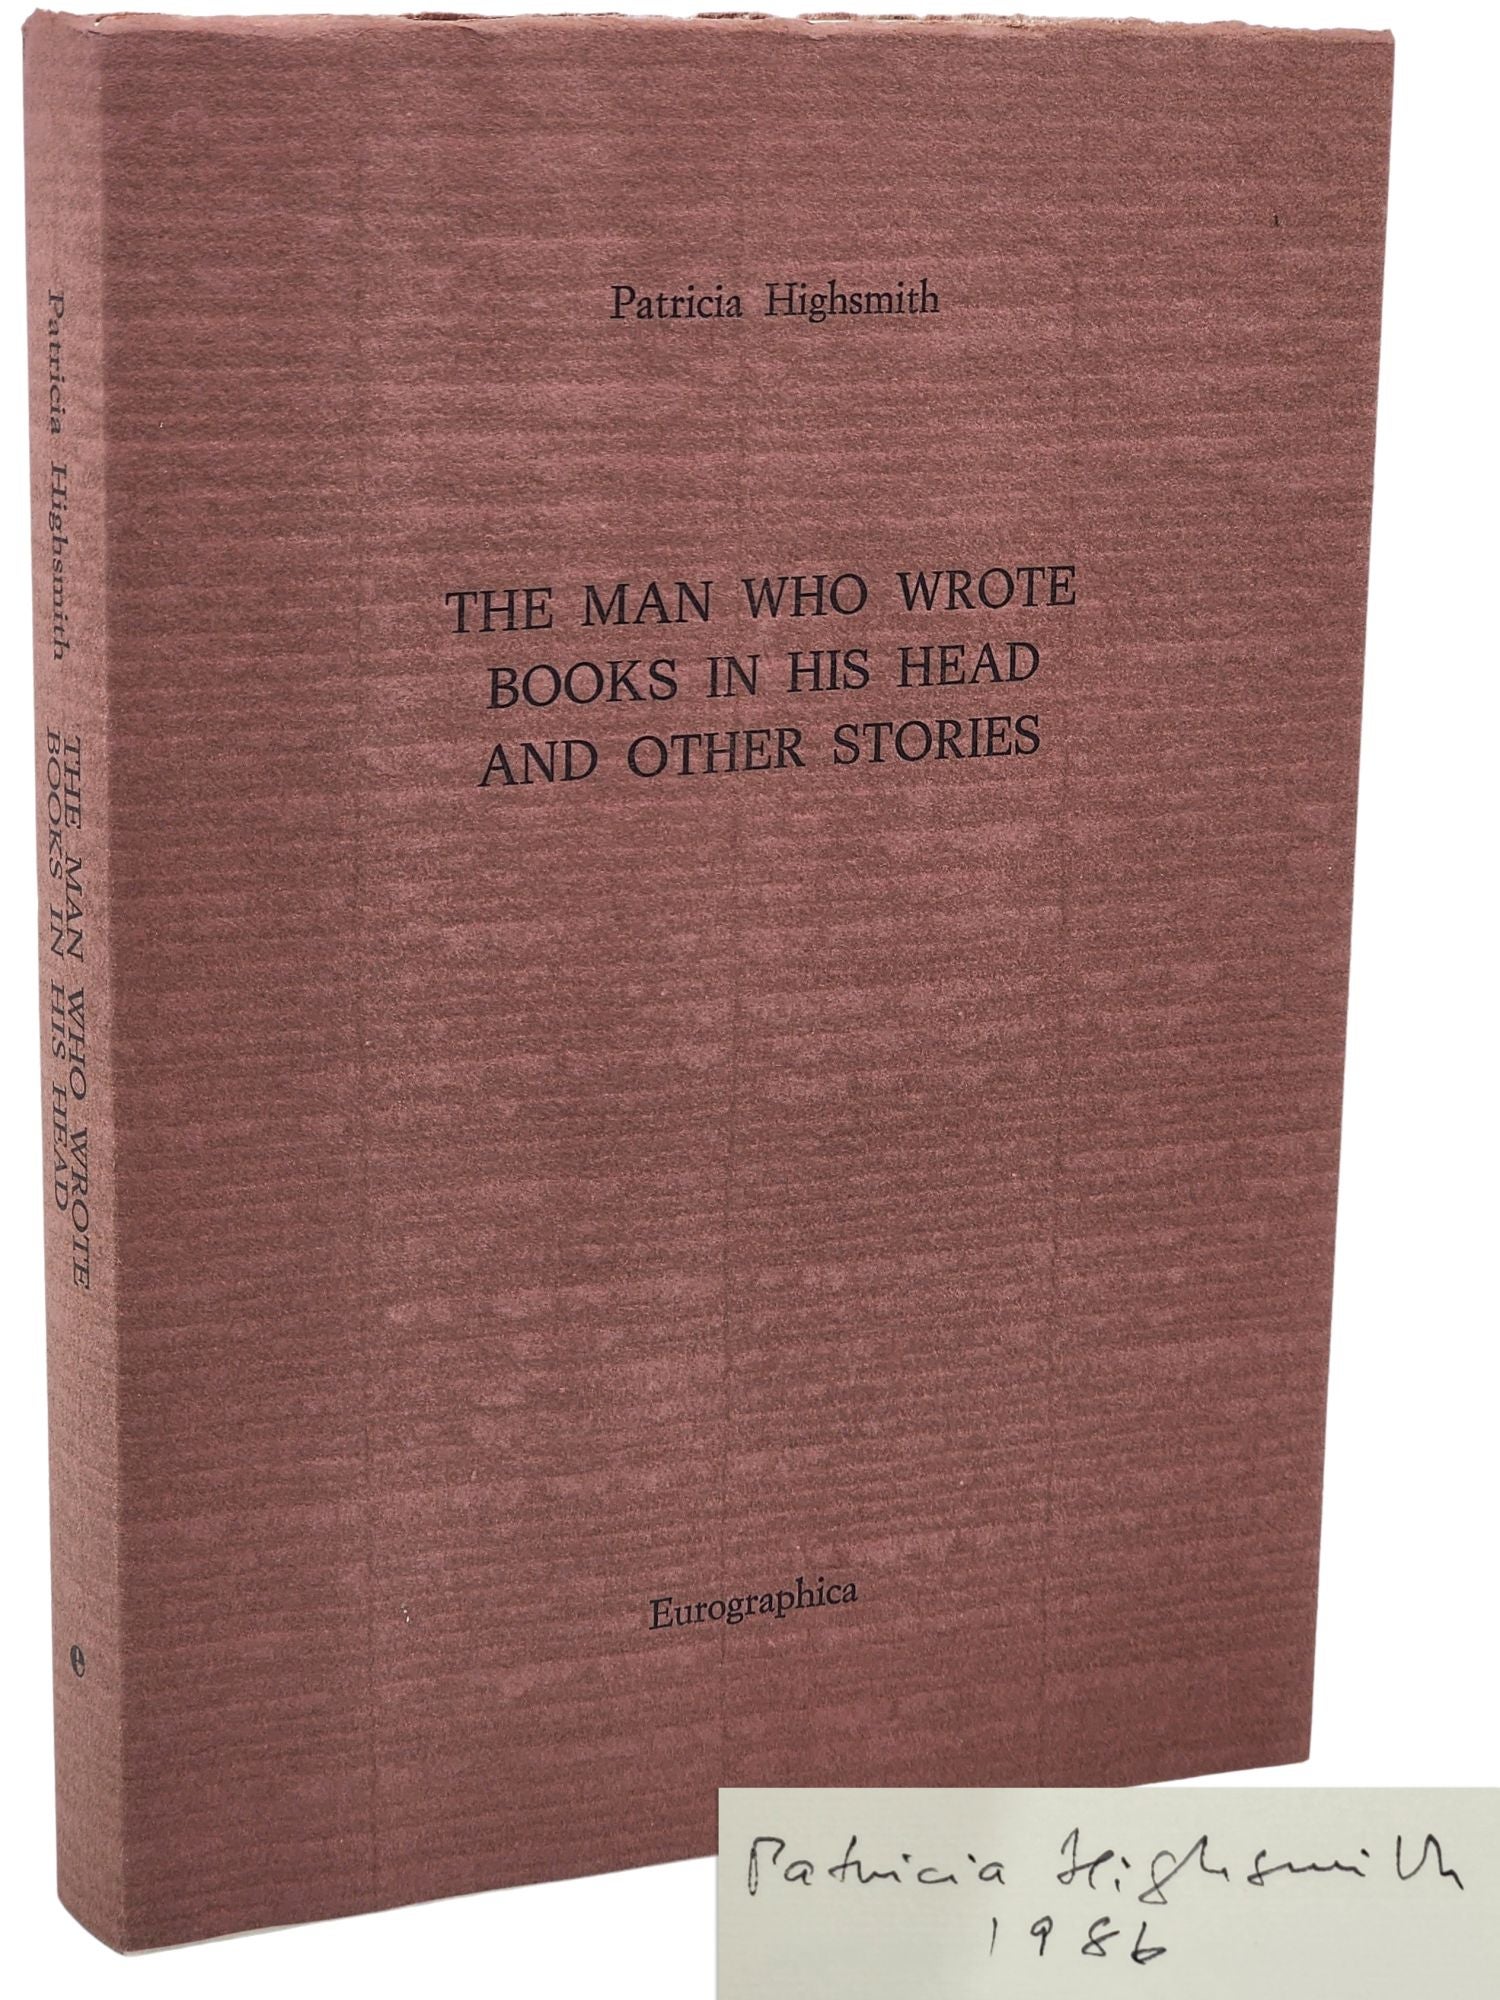 [Book #50870] THE MAN WHO WROTE BOOKS IN HIS HEAD AND OTHER STORIES. Patricia Highsmith.